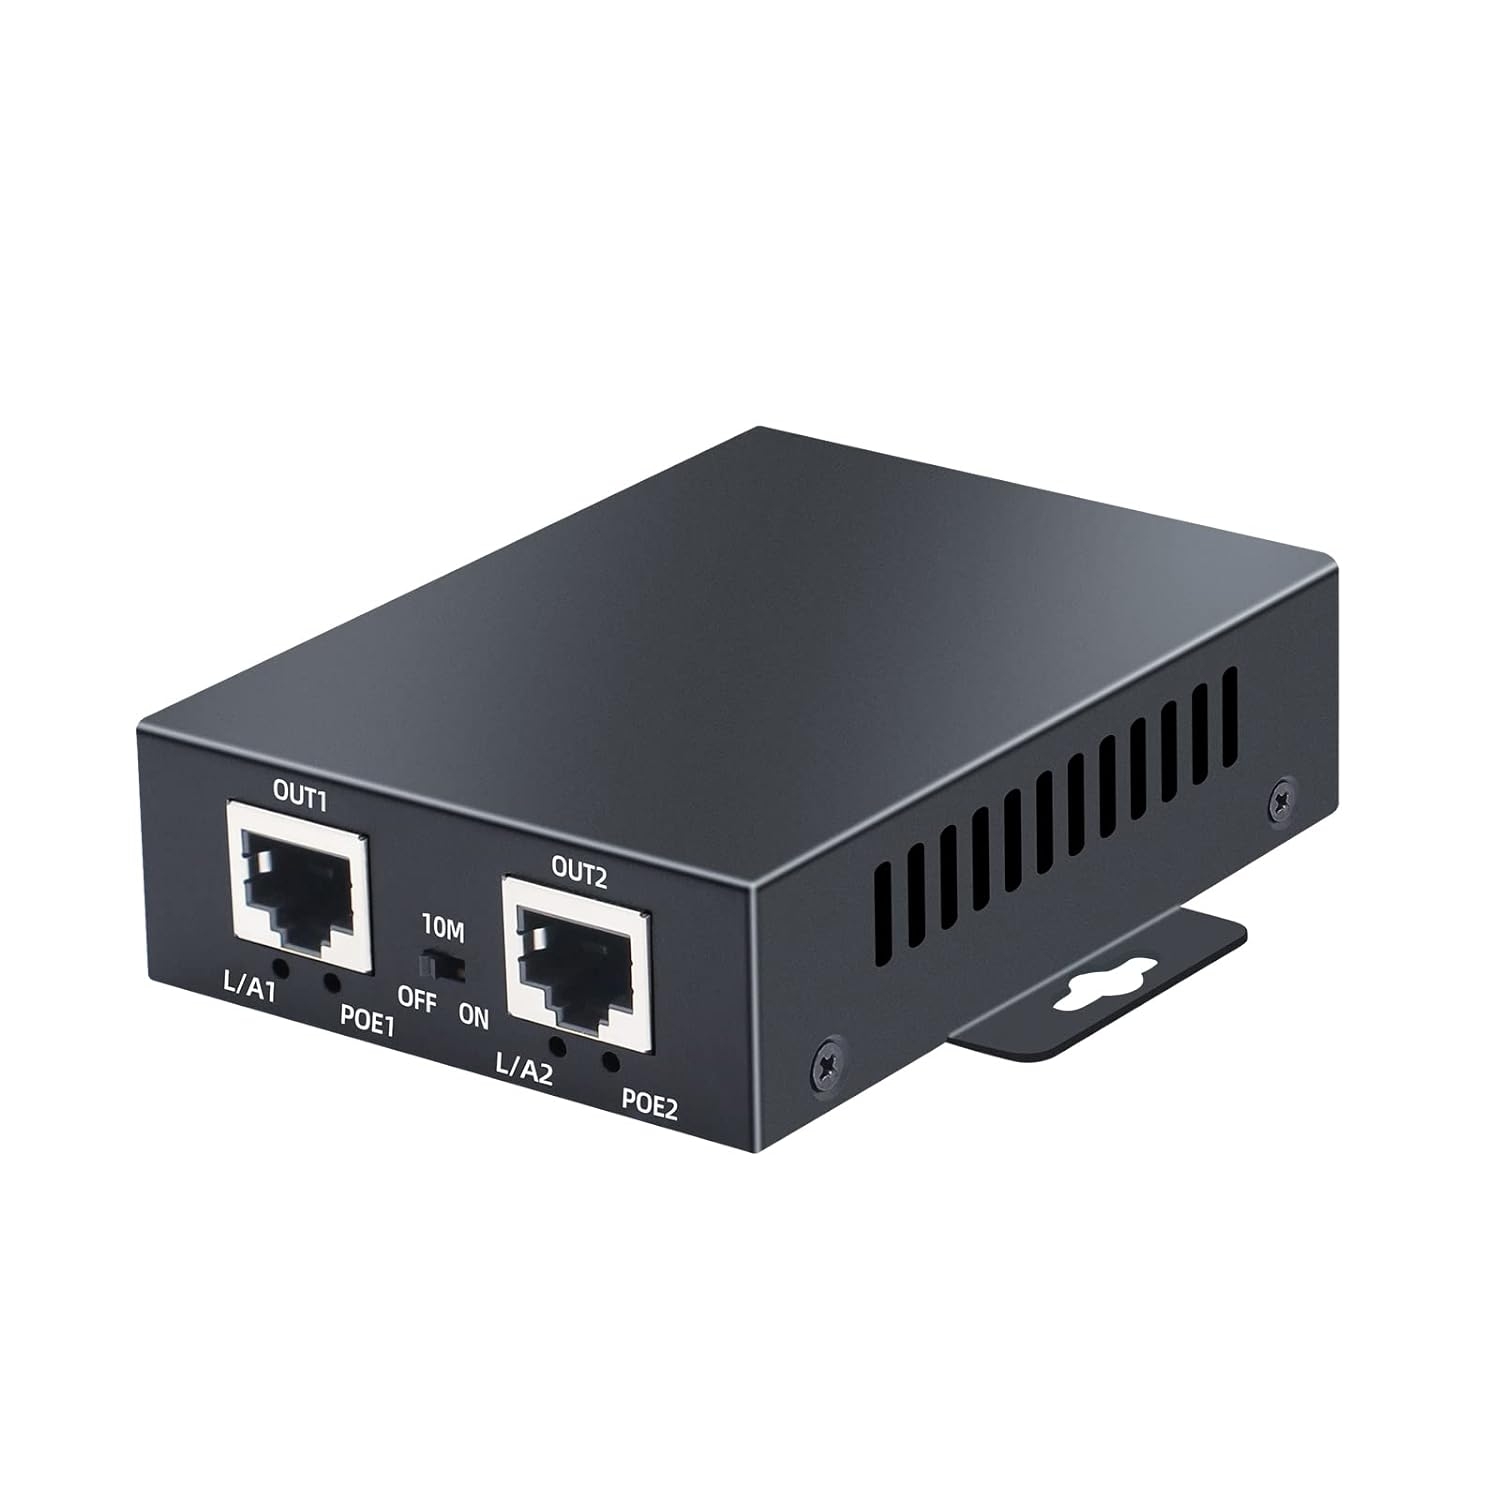 2 Port POE Extender 10/100Mbps, 1 In 2 Out POE Repeater | IEEE 802.3at / 802.3af, Housing Network PoE Signal Extender